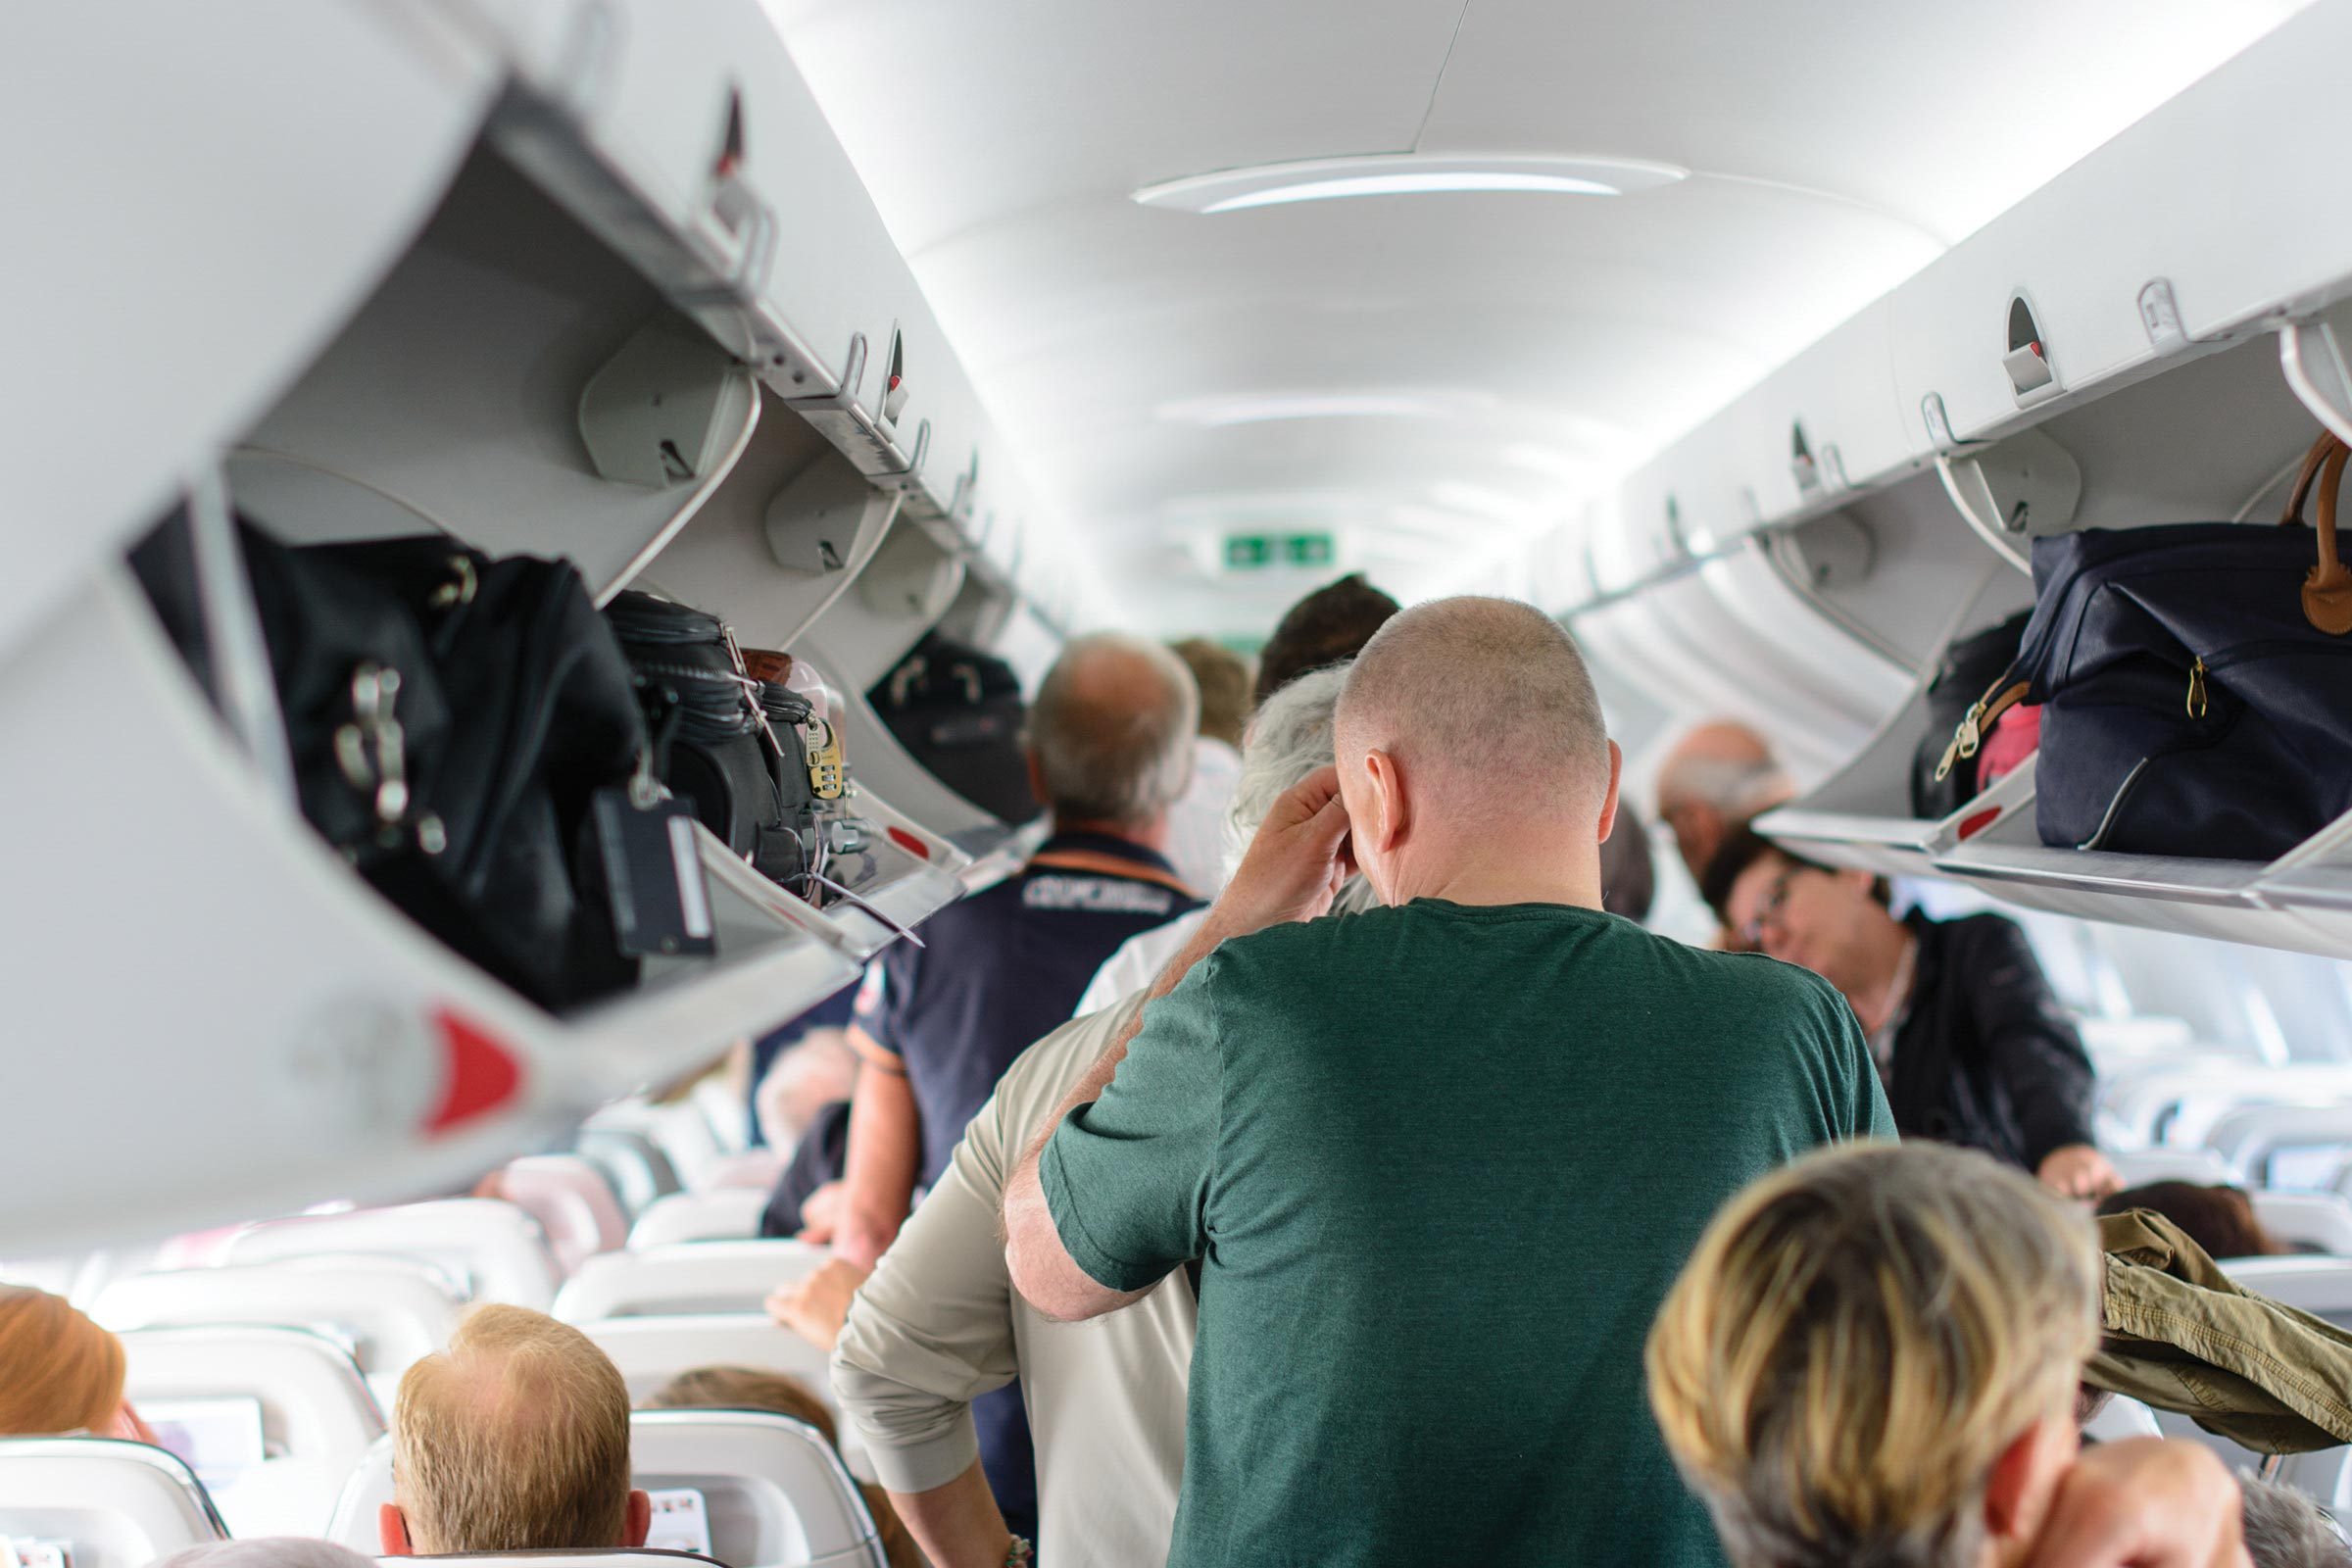 Why You Should Never Use Your Seat-back Pocket on a Plane, According to a  Flight Attendant